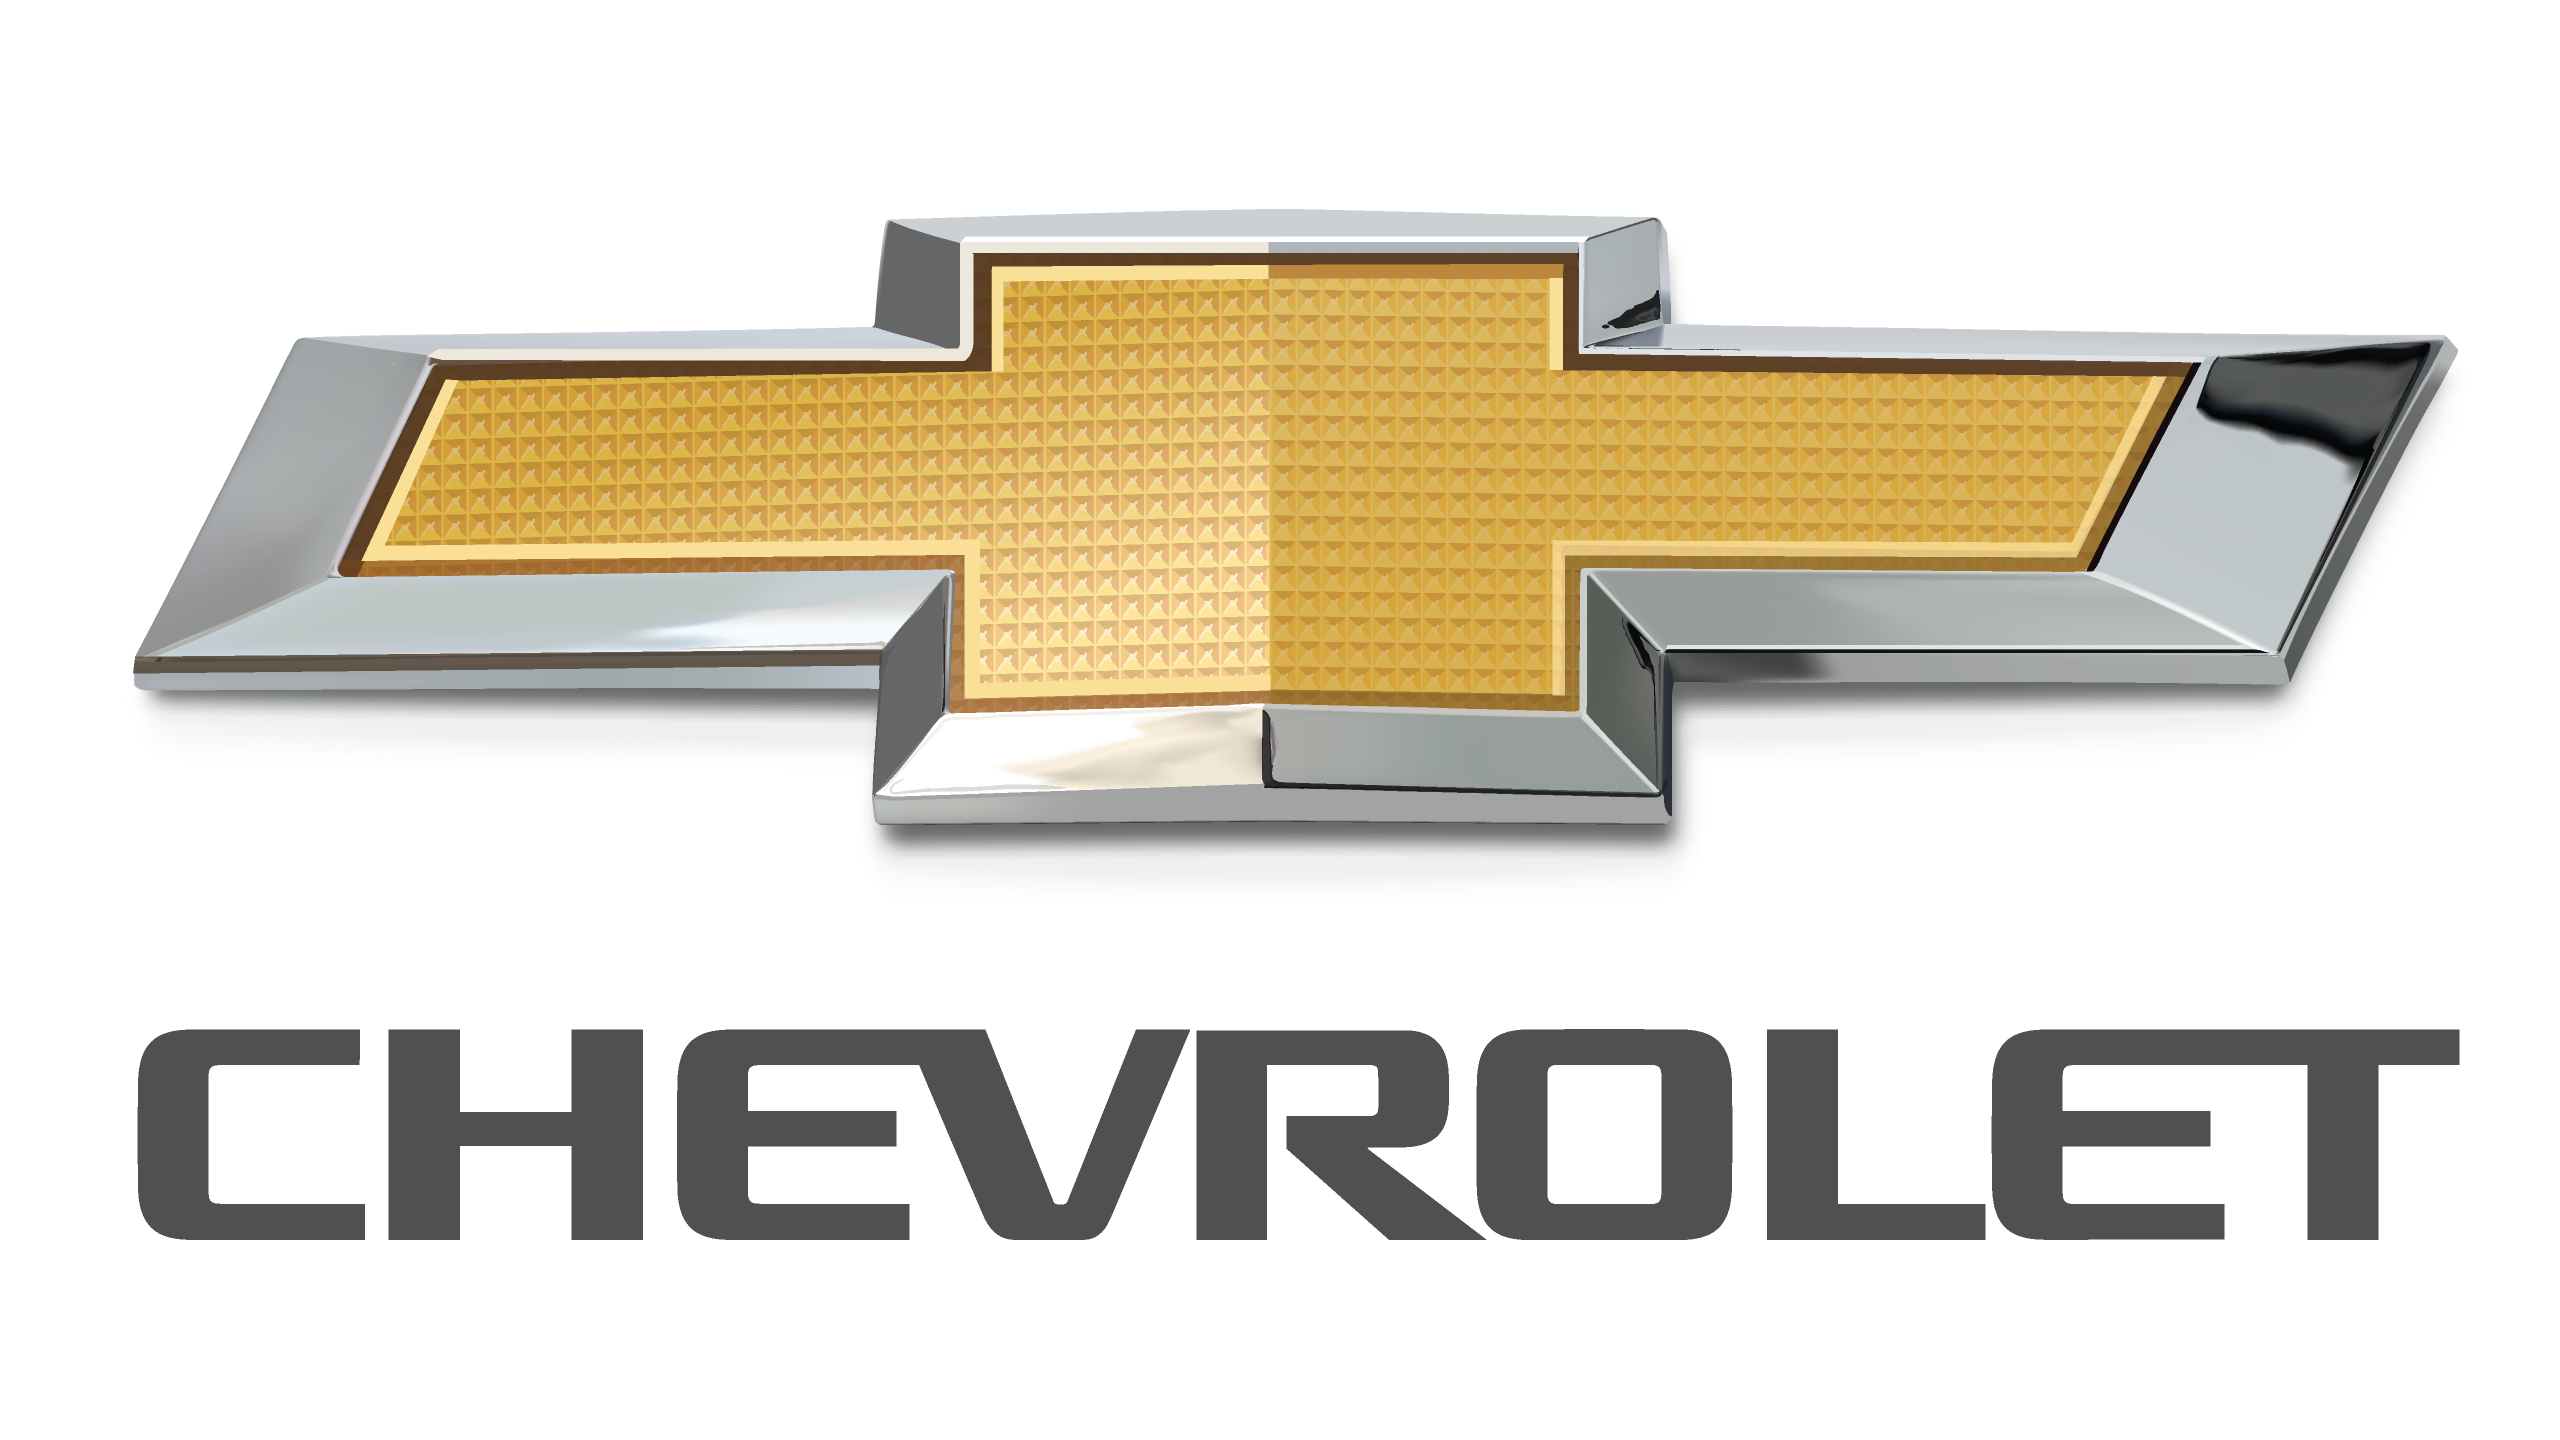 chevy logo Chevrolet logo hd meaning information png